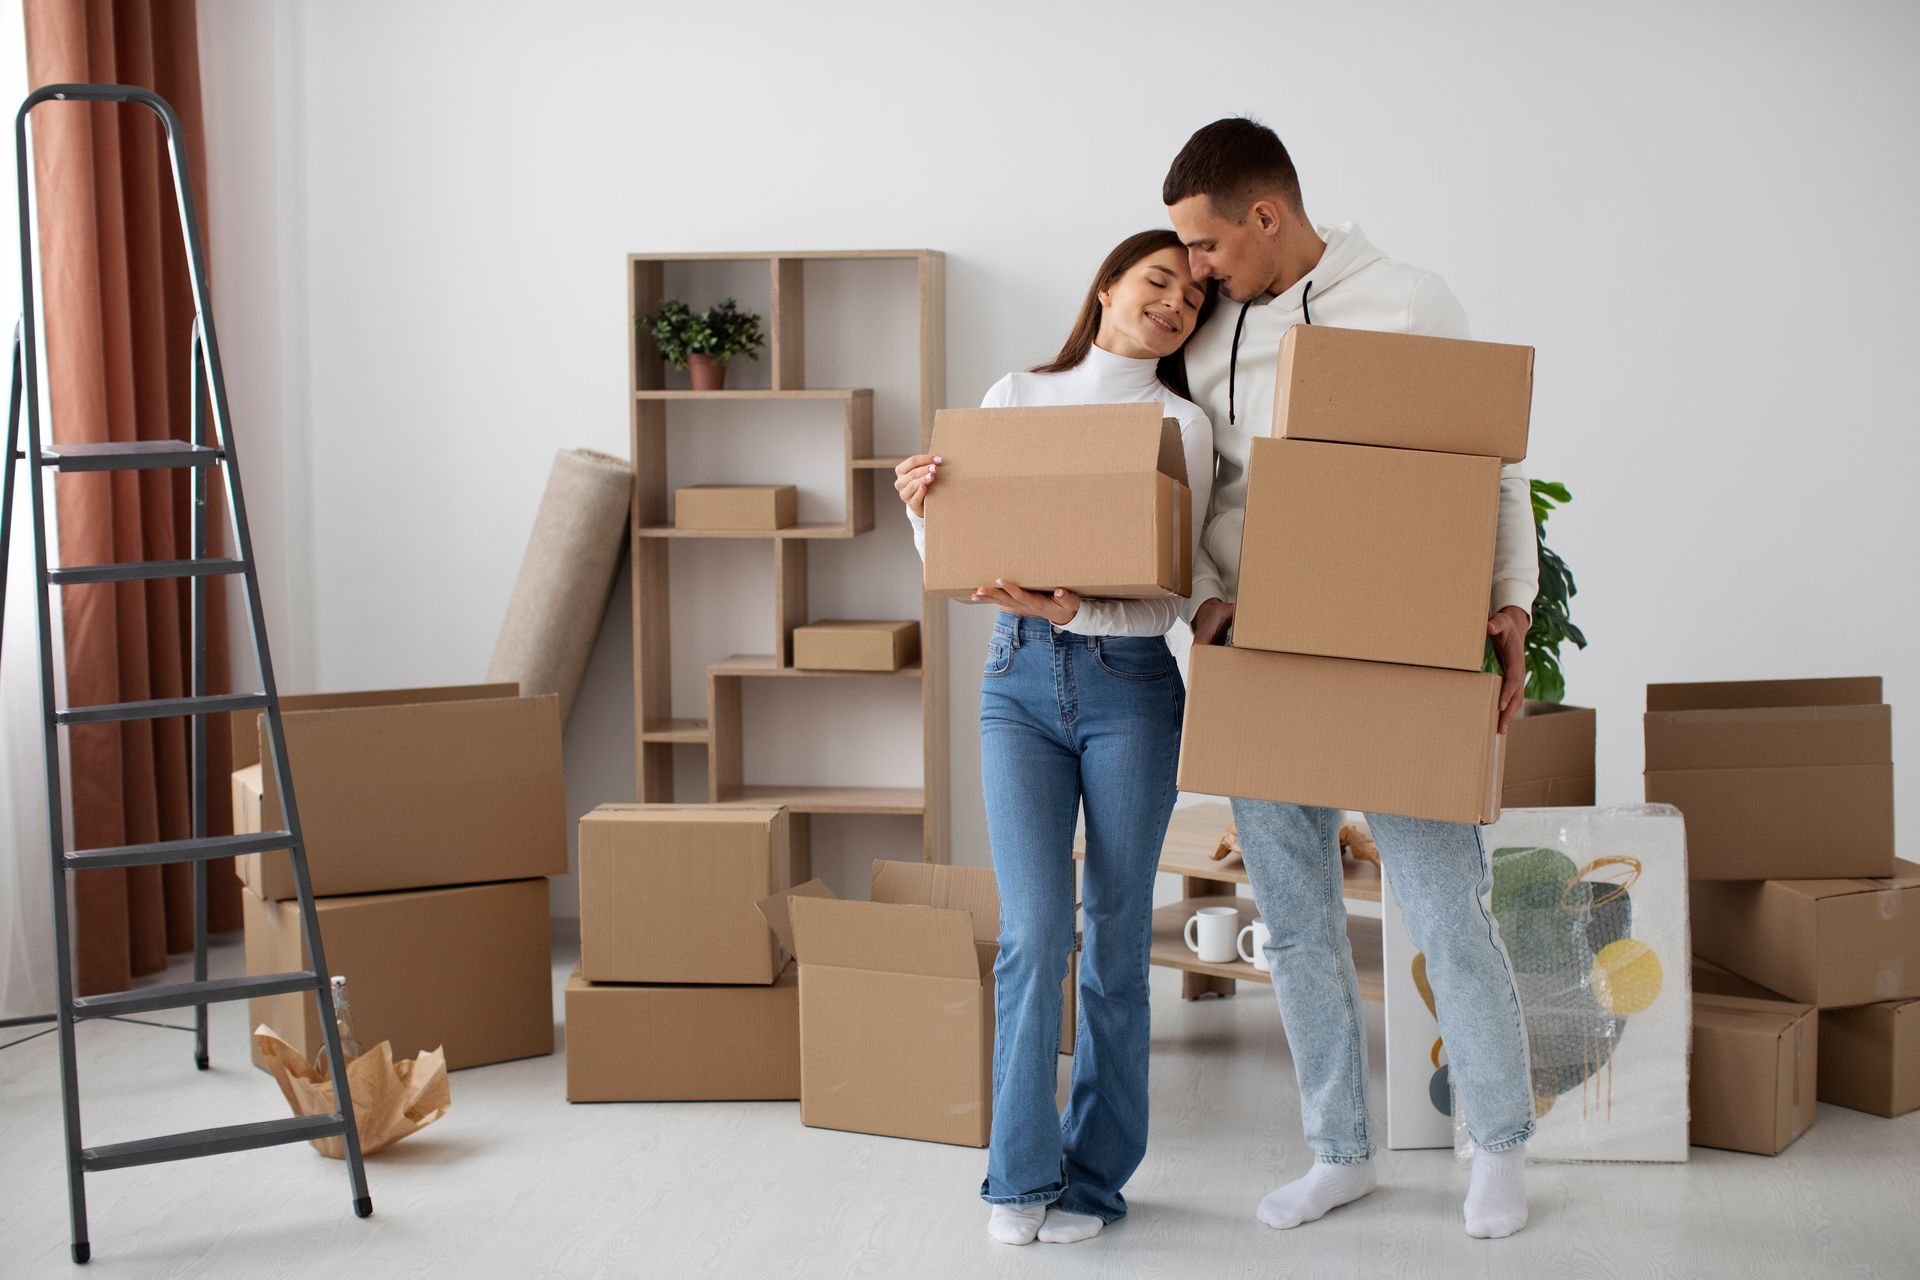 a man and woman holding cardboard boxes in a room